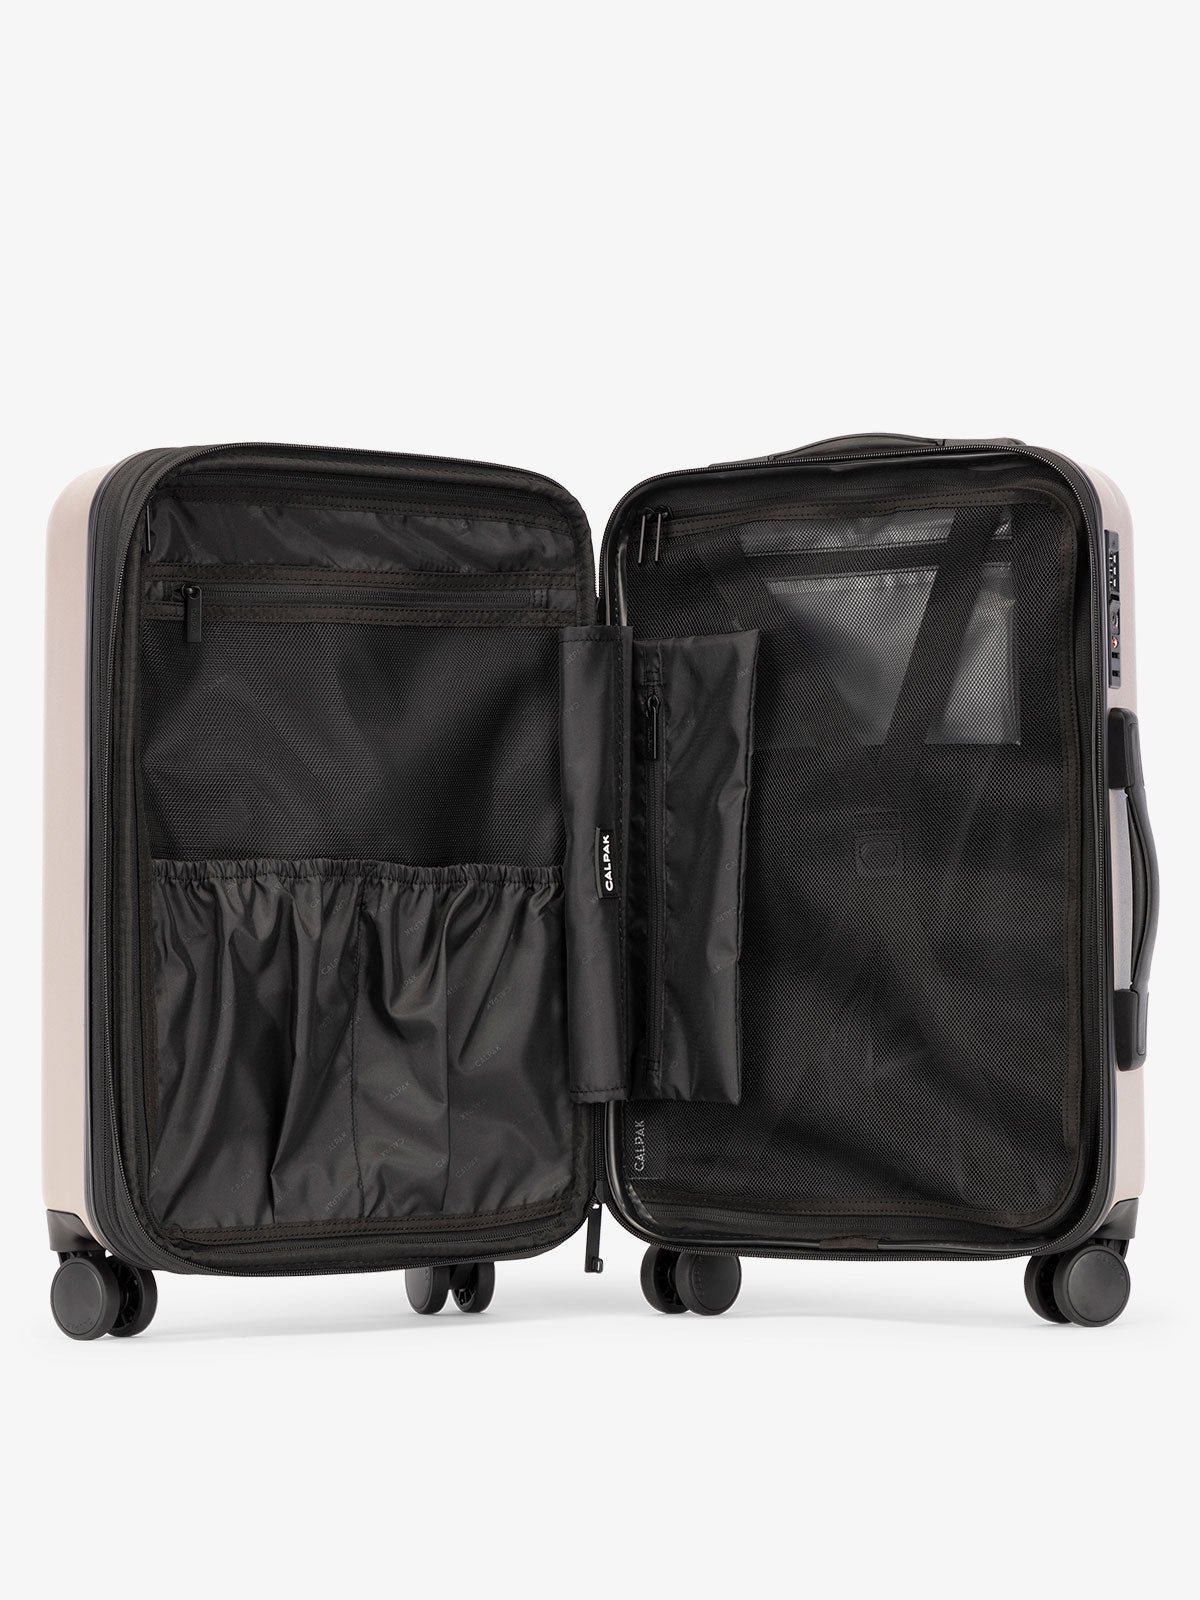 CALPAK Evry Medium Luggage features divided compartments with interior pockets for organized packing in brown